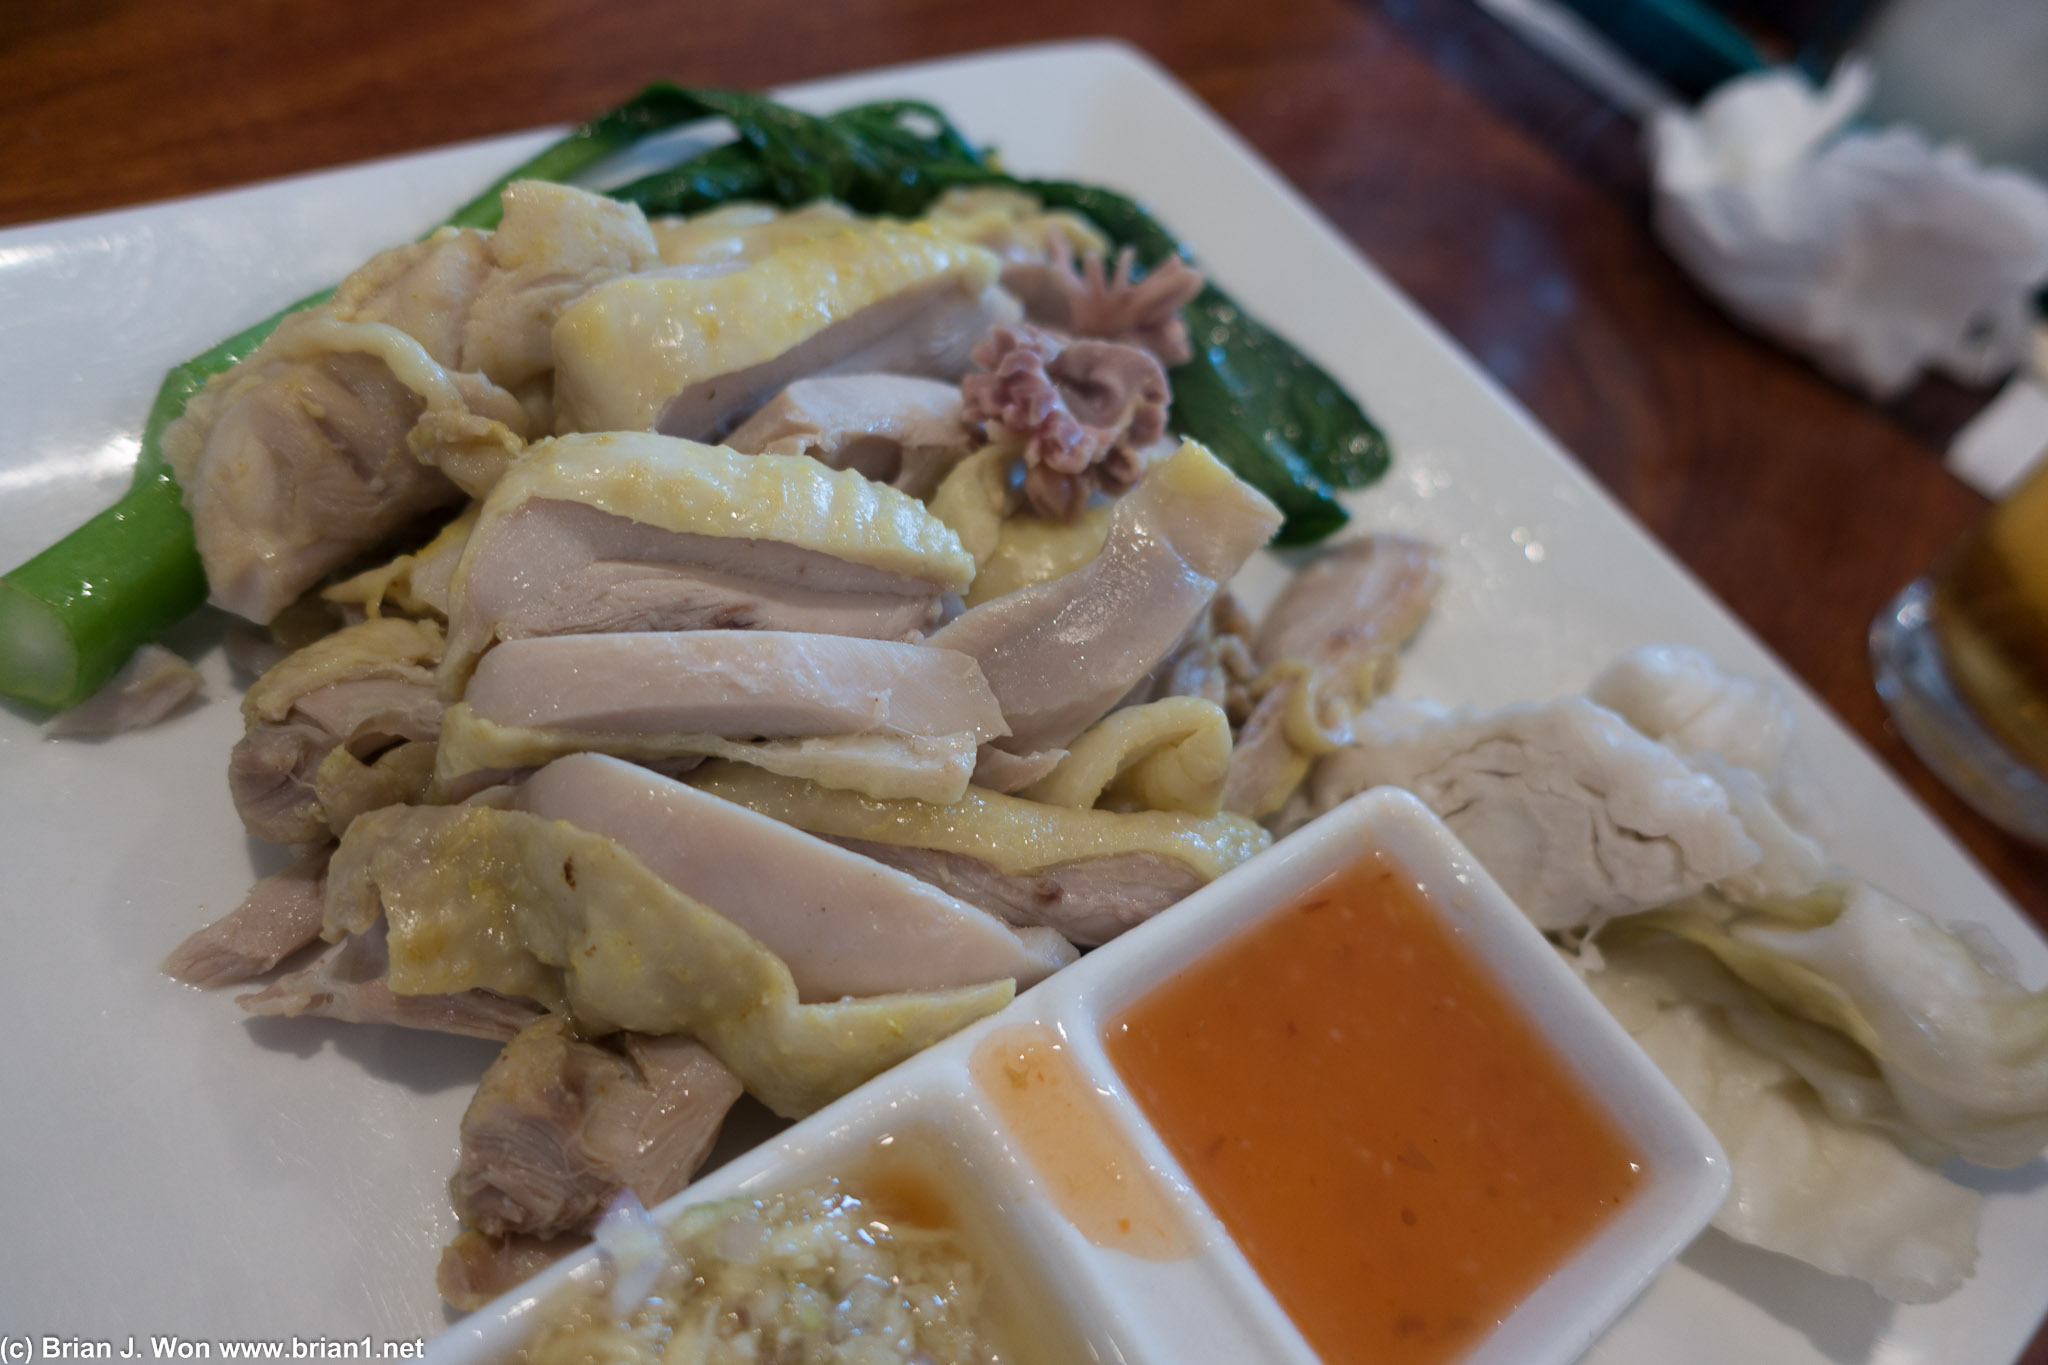 Hainan chicken. Not bad for a noodle place.